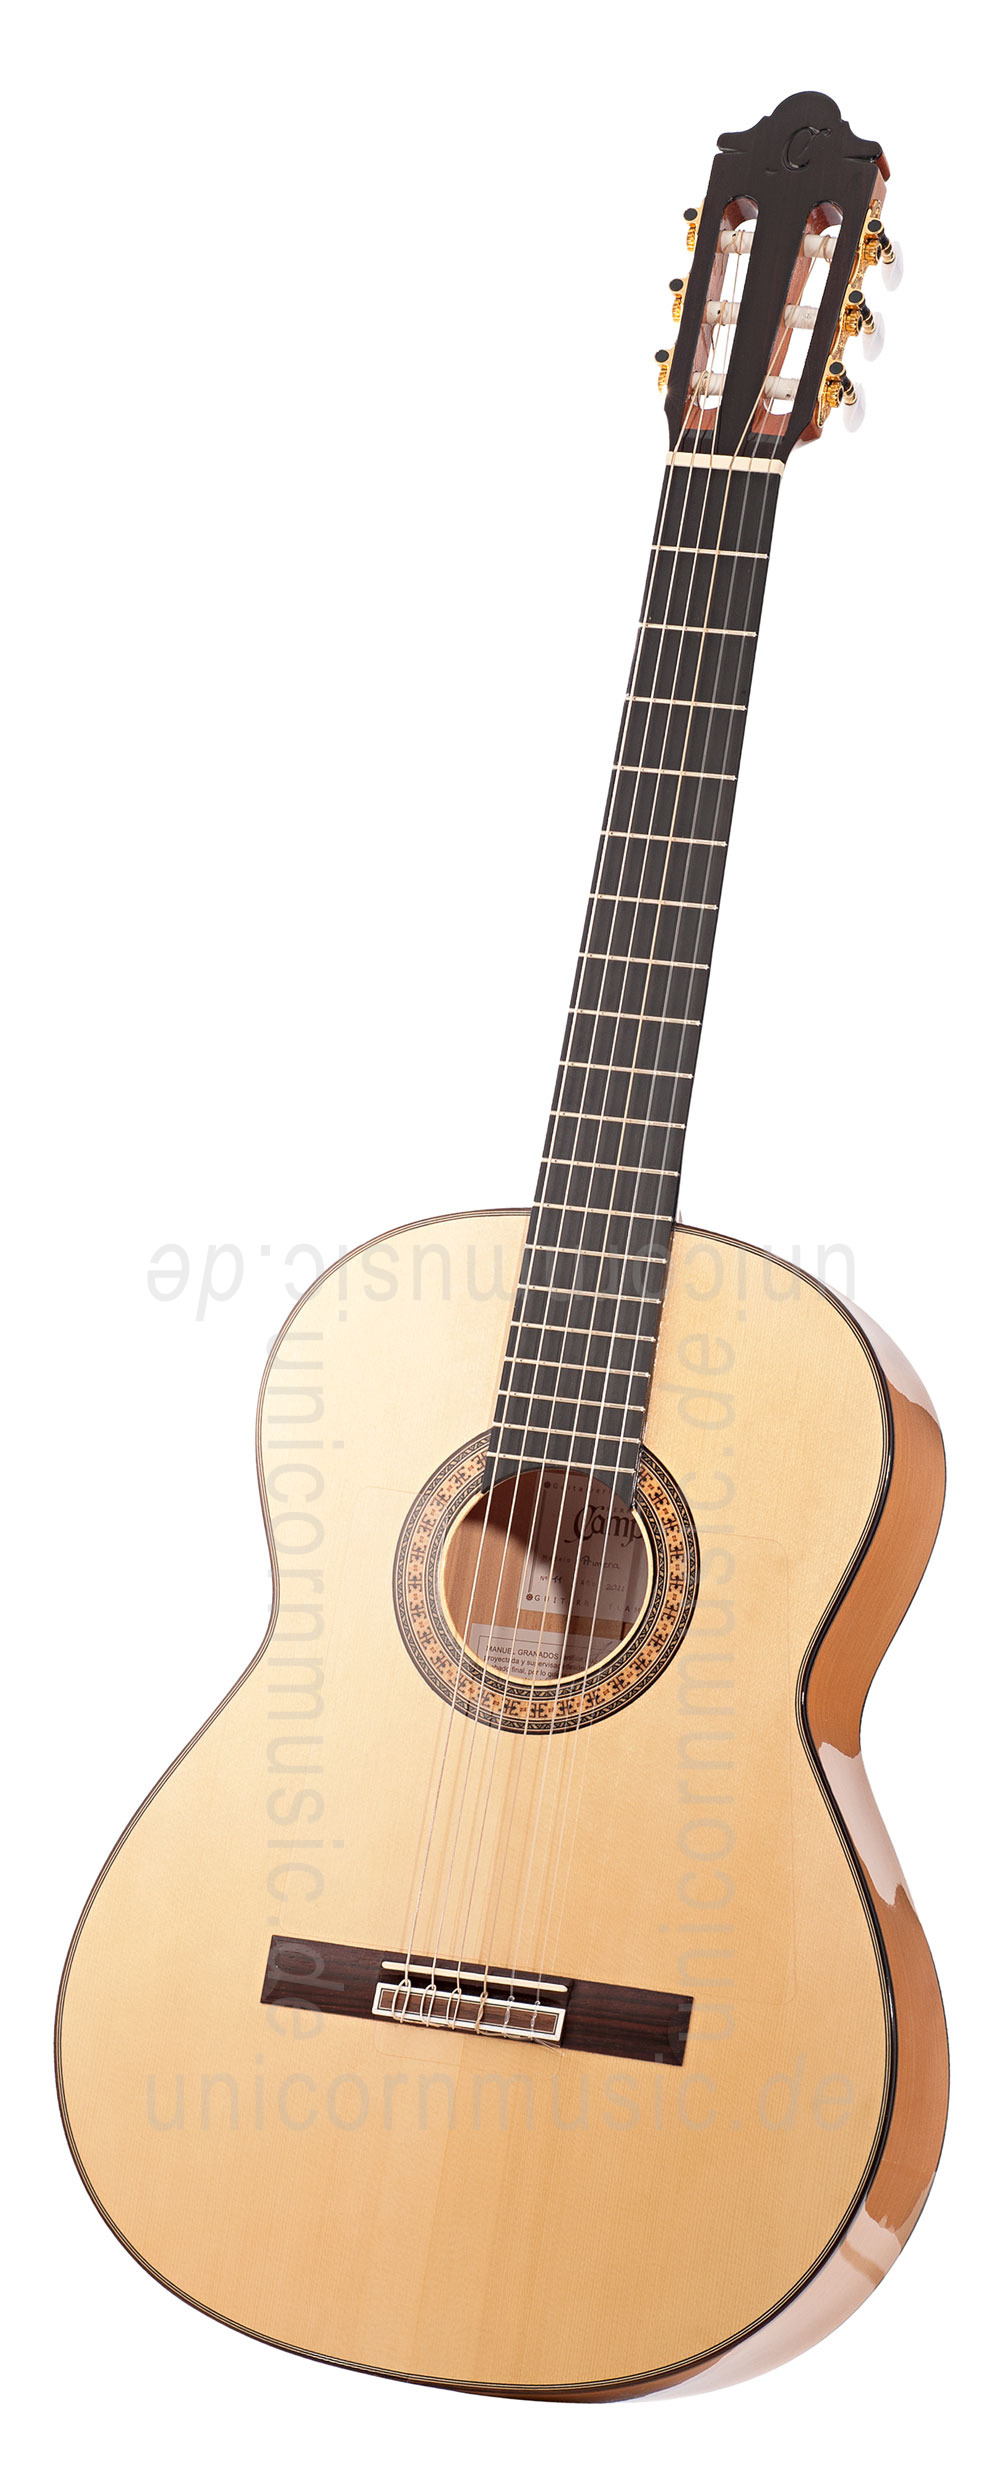 to article description / price Spanish Flamenco Guitar CAMPS PRIMERA A CYPRESS (blanca) - all solid - spruce top